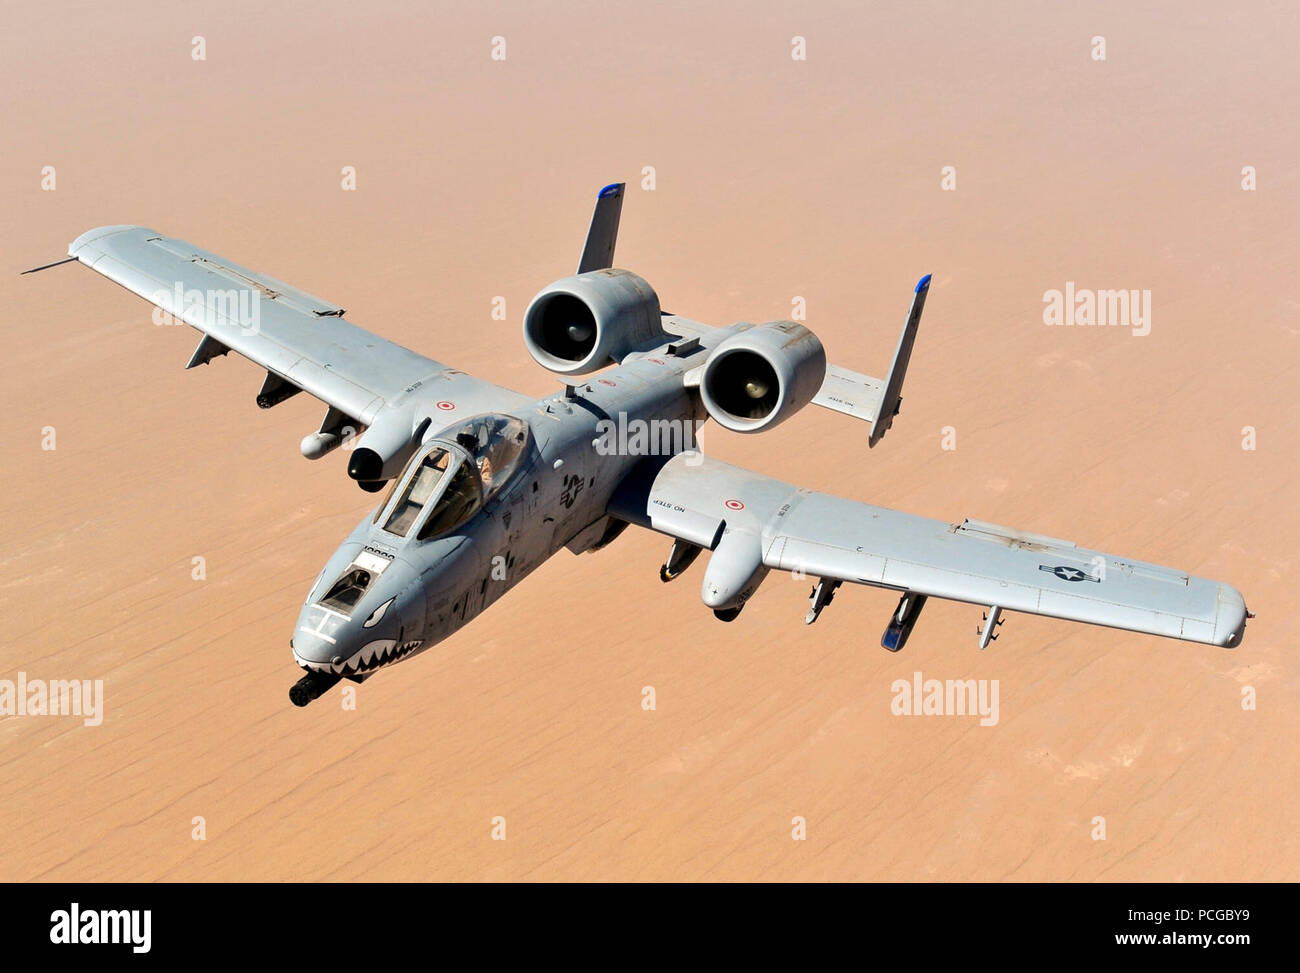 An A-10 Thunderbolt II, assigned to the 74th Fighter Squadron, Moody Air Force Base, GA, returns to mission after receiving fuel from a KC-135 Stratotanker, 340th Expeditionary Air Refueling Squadron, over the skies of Afghanistan in support of Operation Enduring Freedom, May 8, 2011. Stock Photo